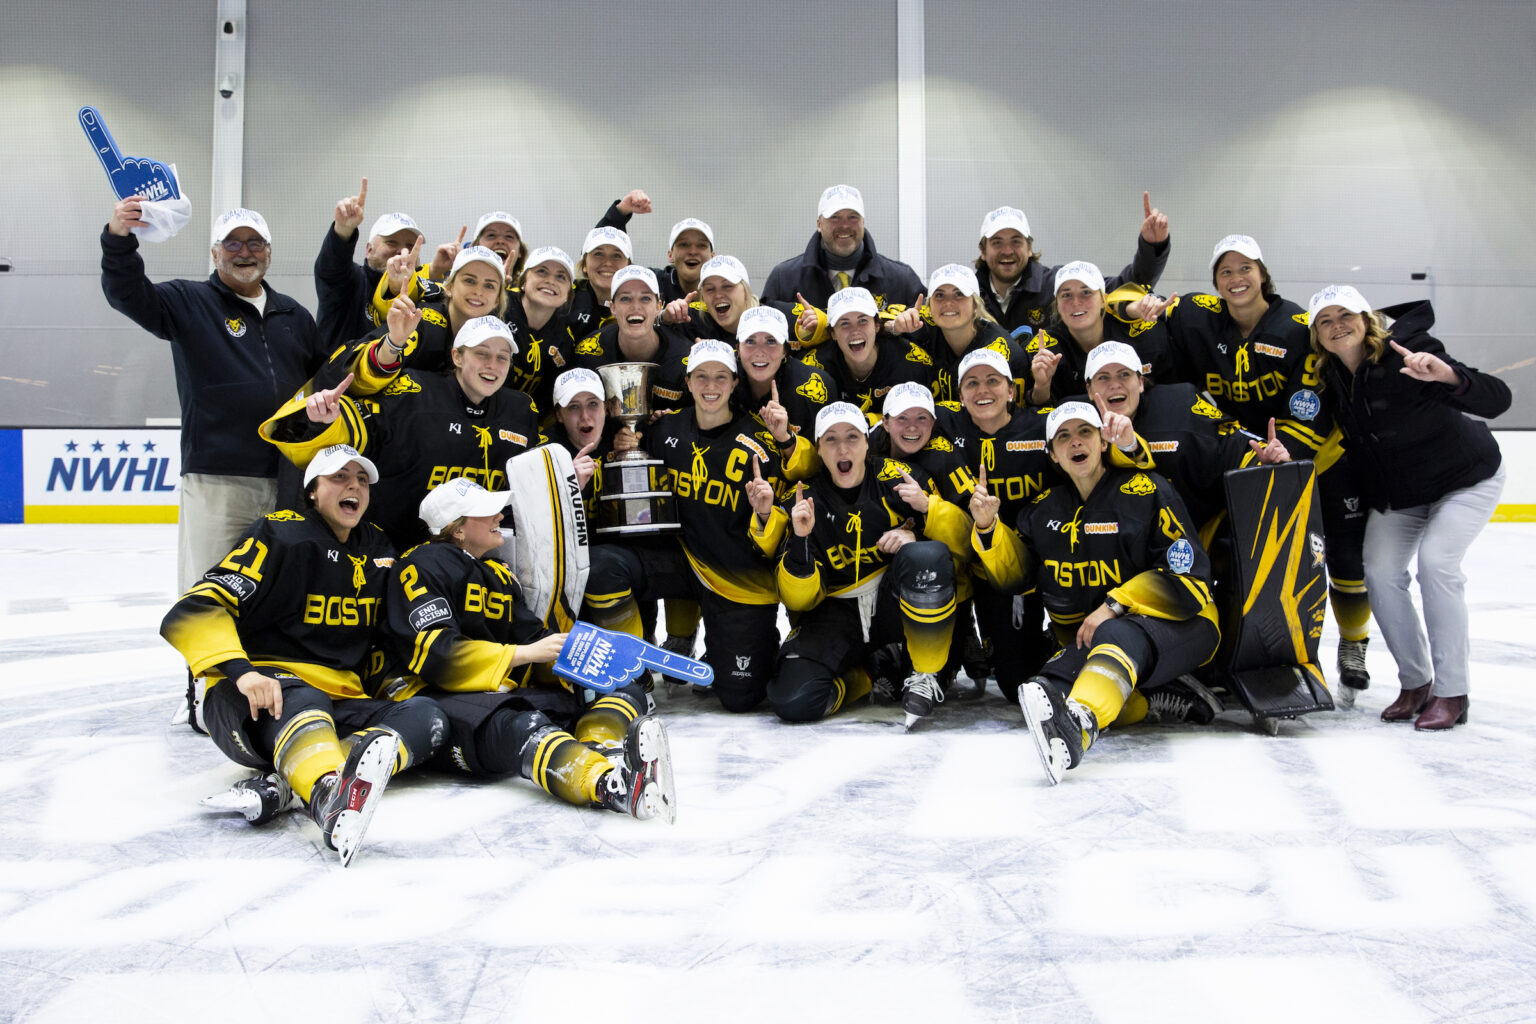 NWHL Boston Pride win 2021 Isobel Cup, 1st Team With 2 Titles